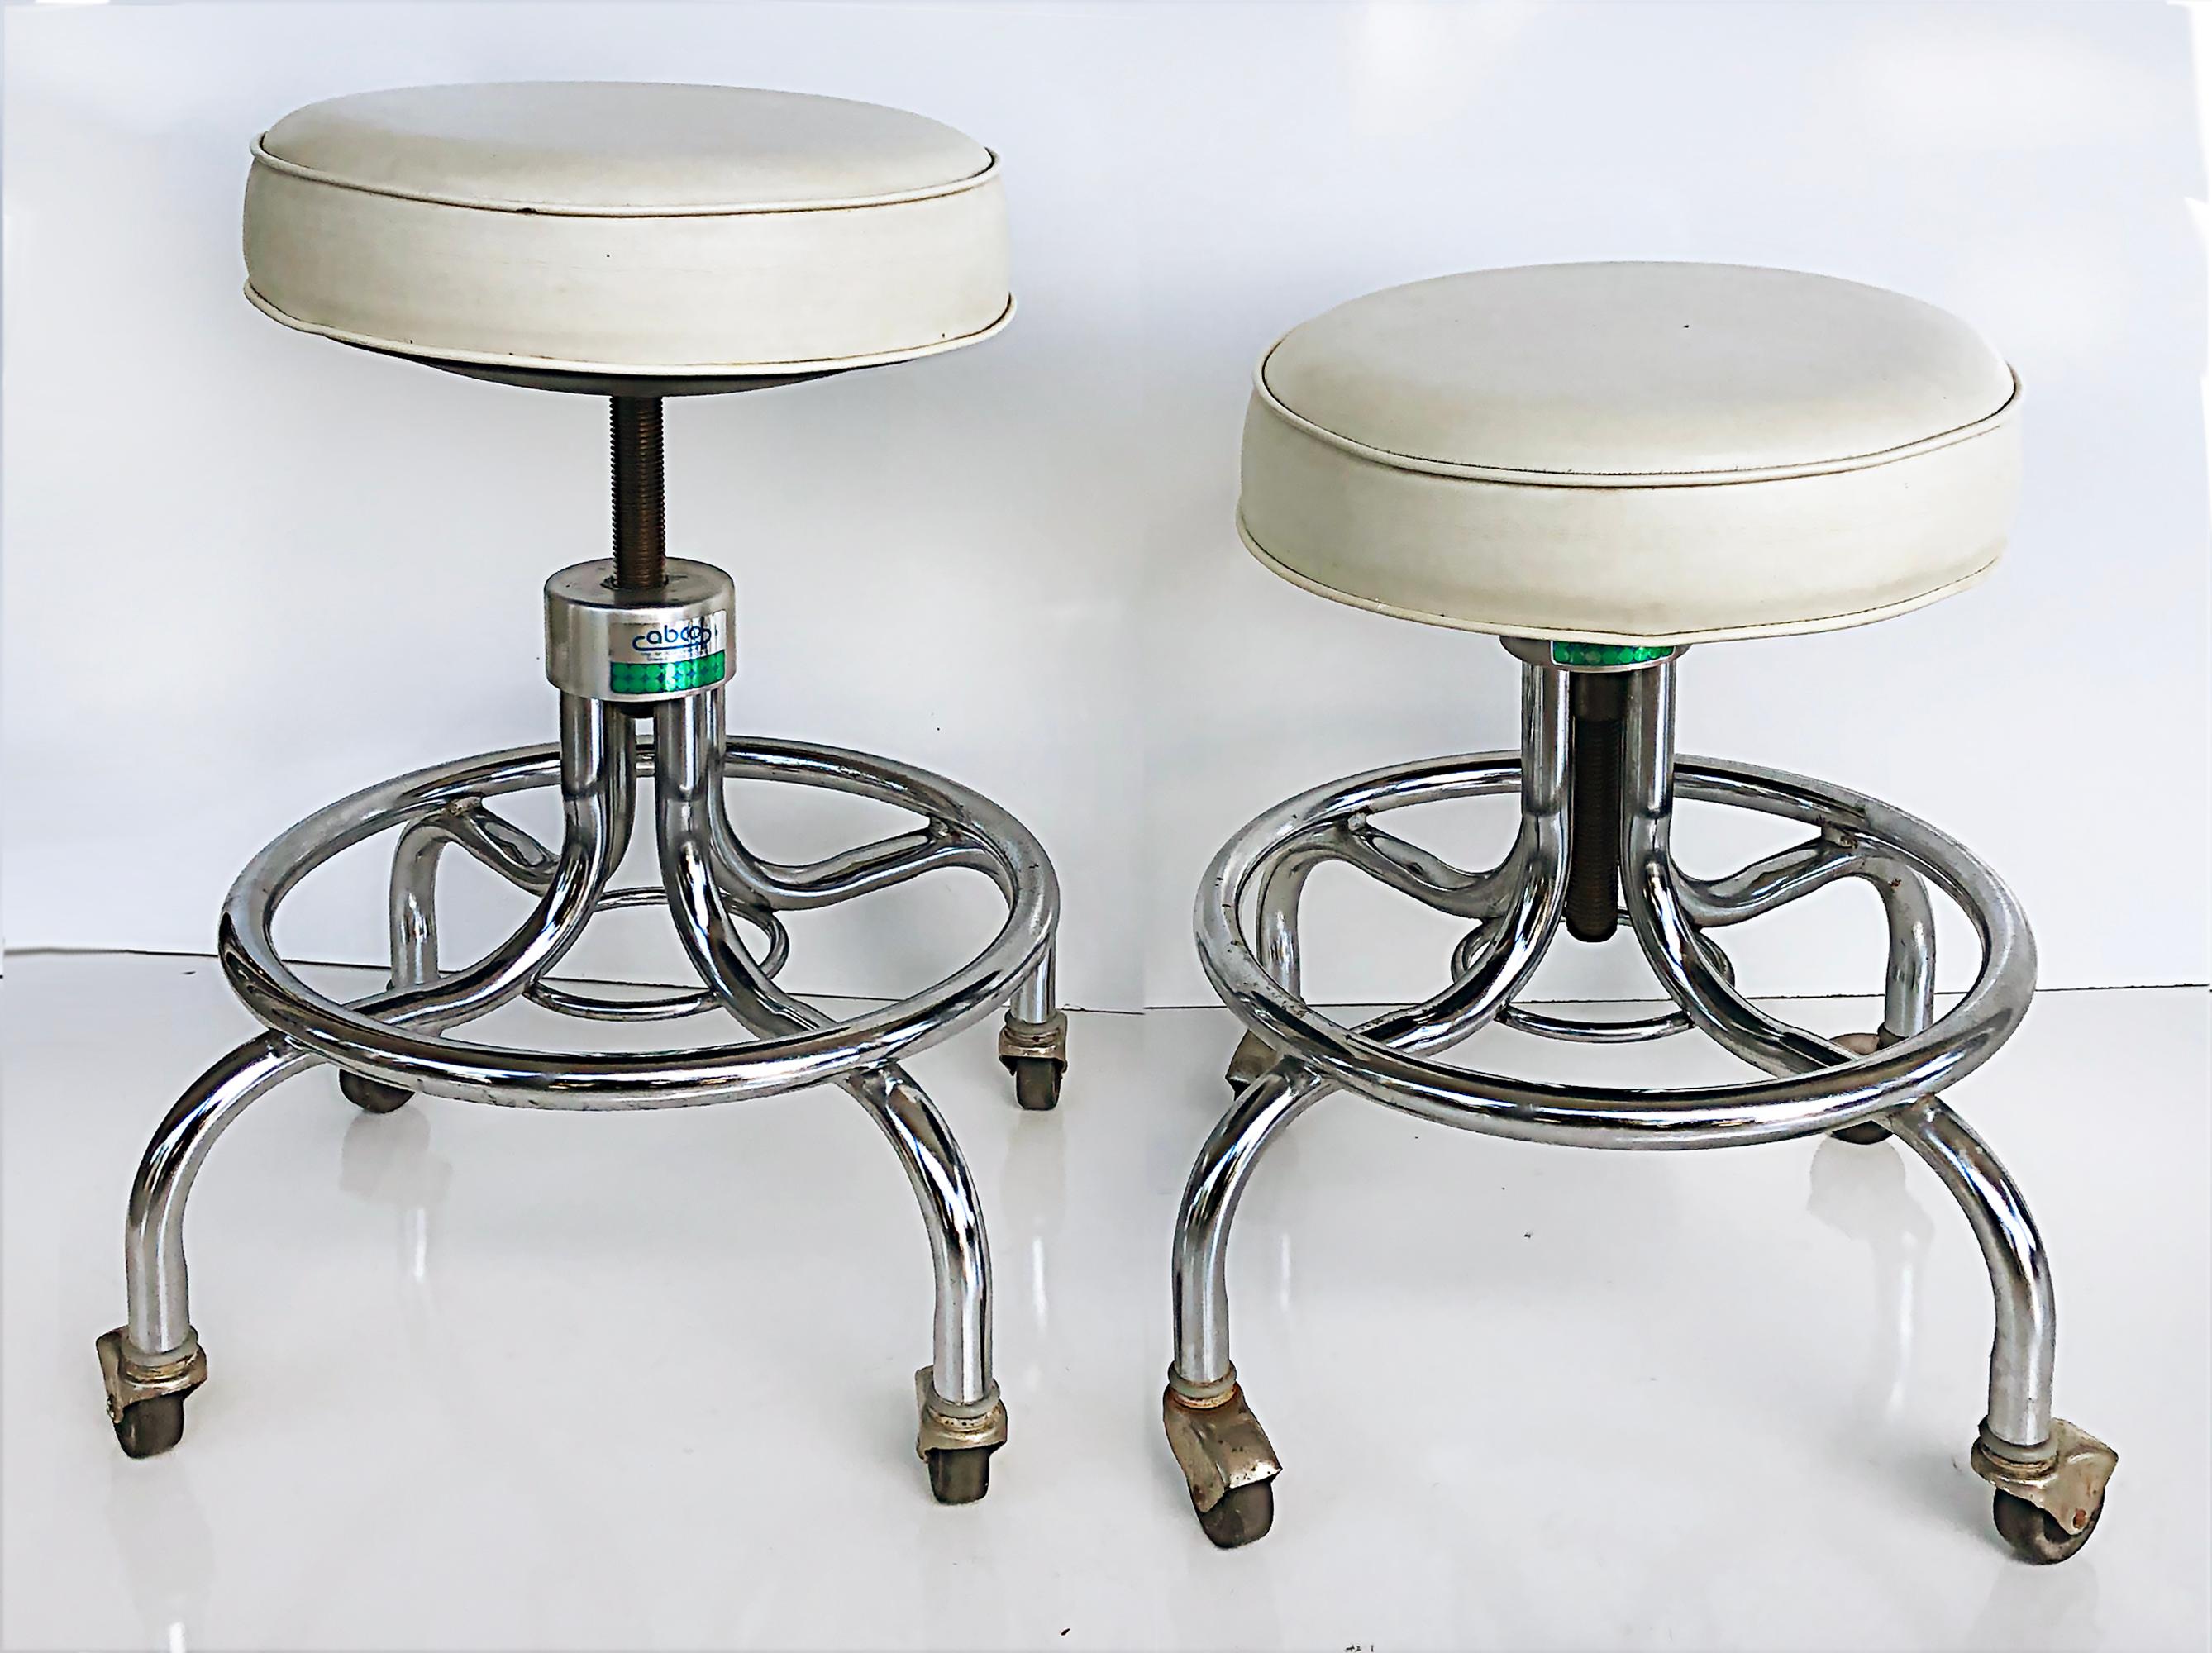 Midcentury Industrial adjustable Chrome counter stools on casters, pair

Offered for sale is a pair of midcentury Industrial chrome counter height stools that have adjustable seats. The legs of the stools are on casters and the seats have their